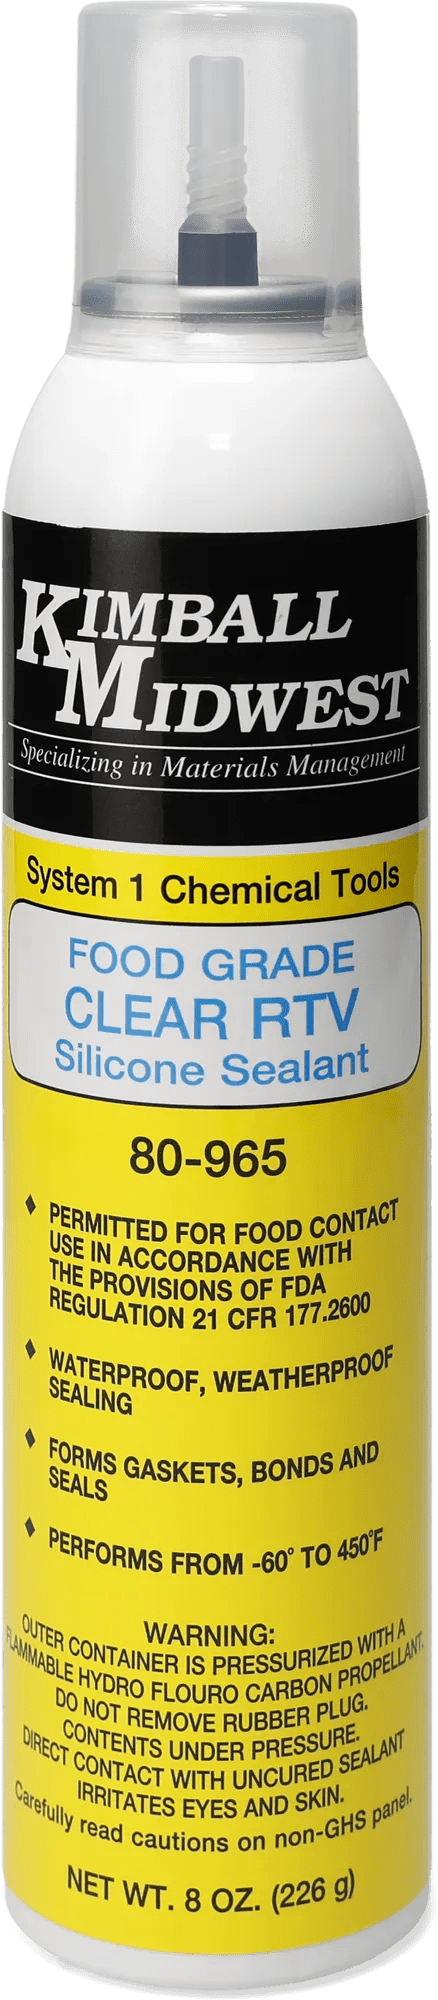 Clear RTV Silicone Gasket Maker & Sealant - 7-1/4 oz. Can